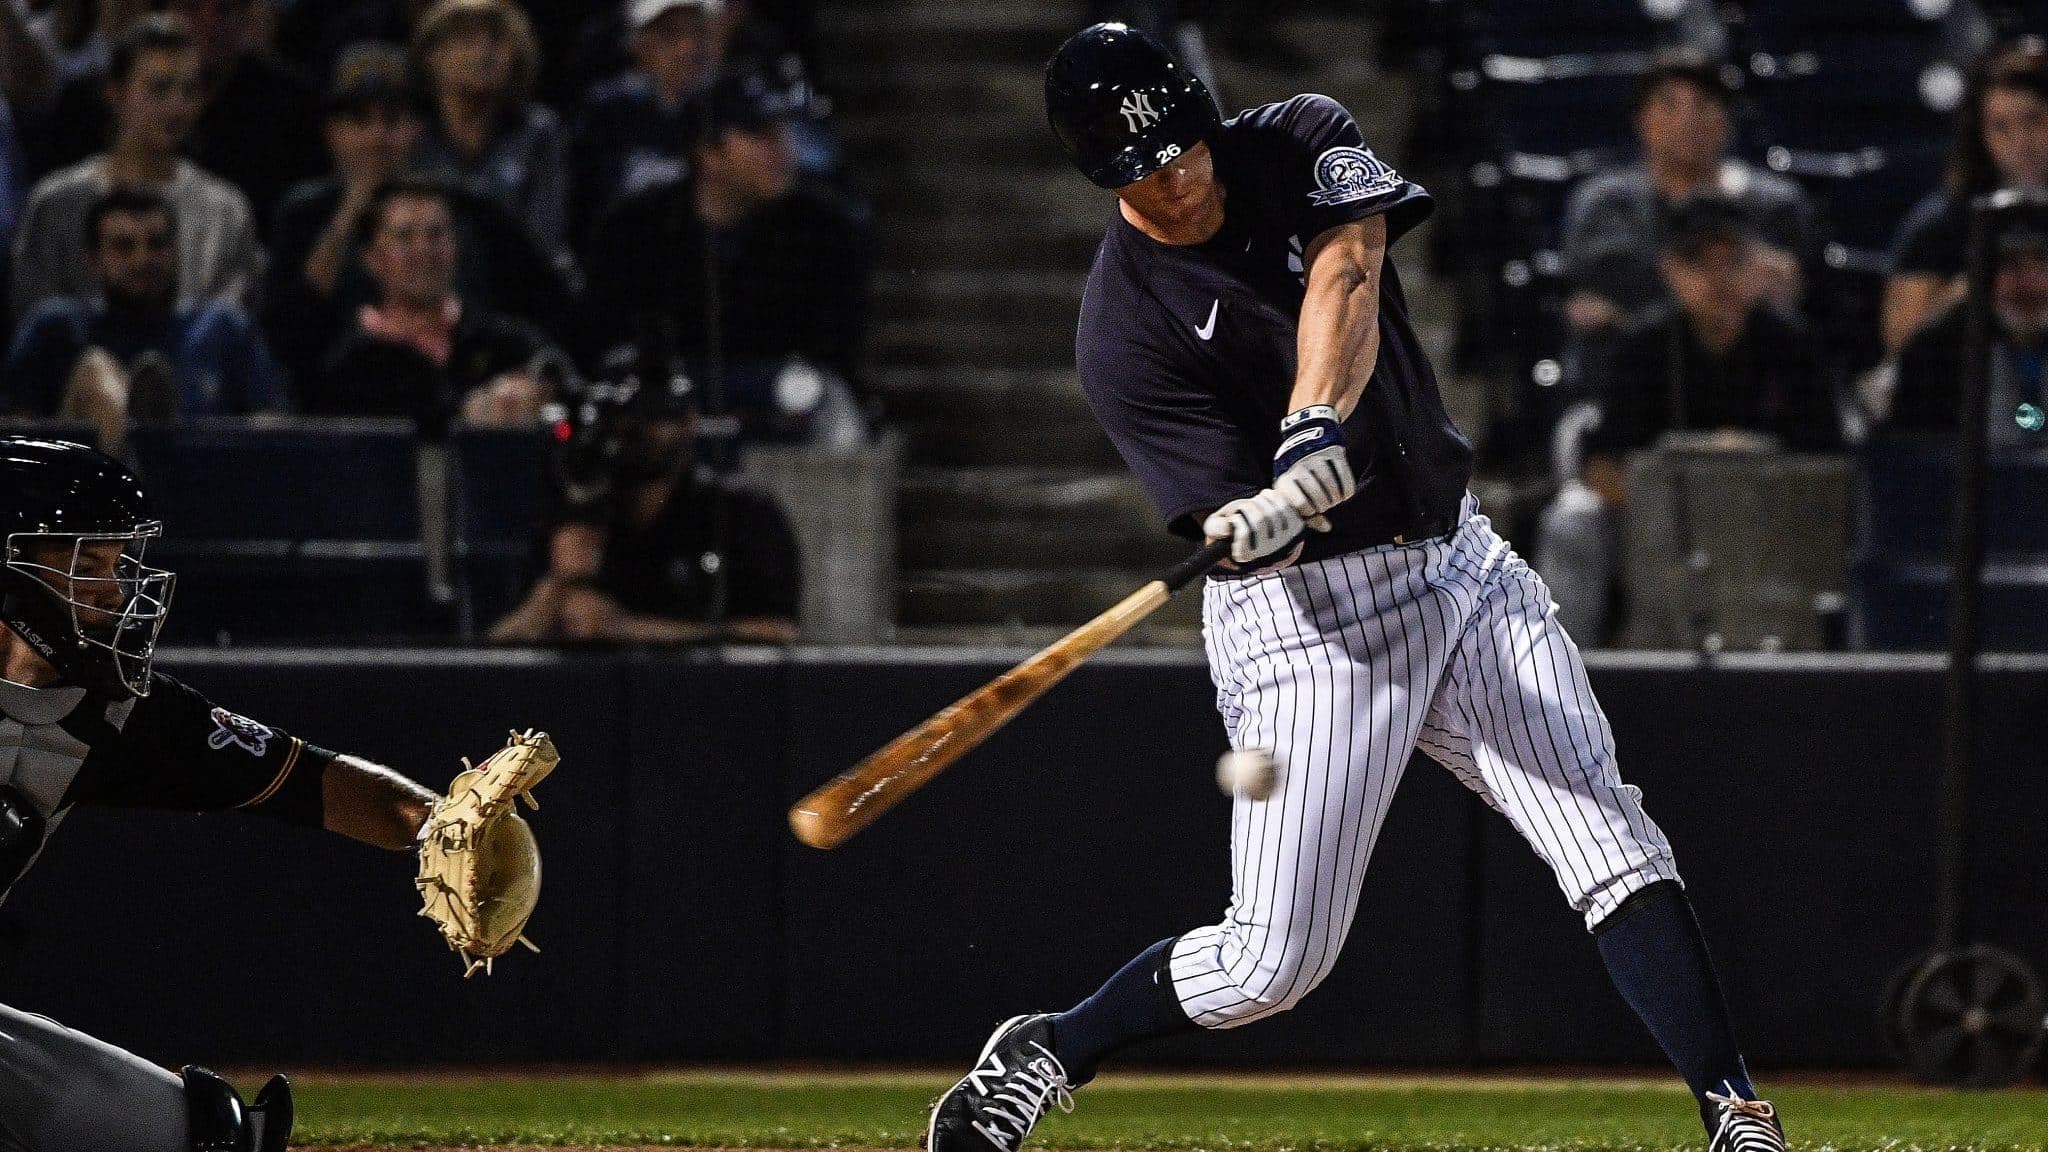 TAMPA, FLORIDA - FEBRUARY 24: DJ LeMahieu #26 of the New York Yankees at bat in the first inning during the spring training game against the Pittsburgh Pirates at Steinbrenner Field on February 24, 2020 in Tampa, Florida.